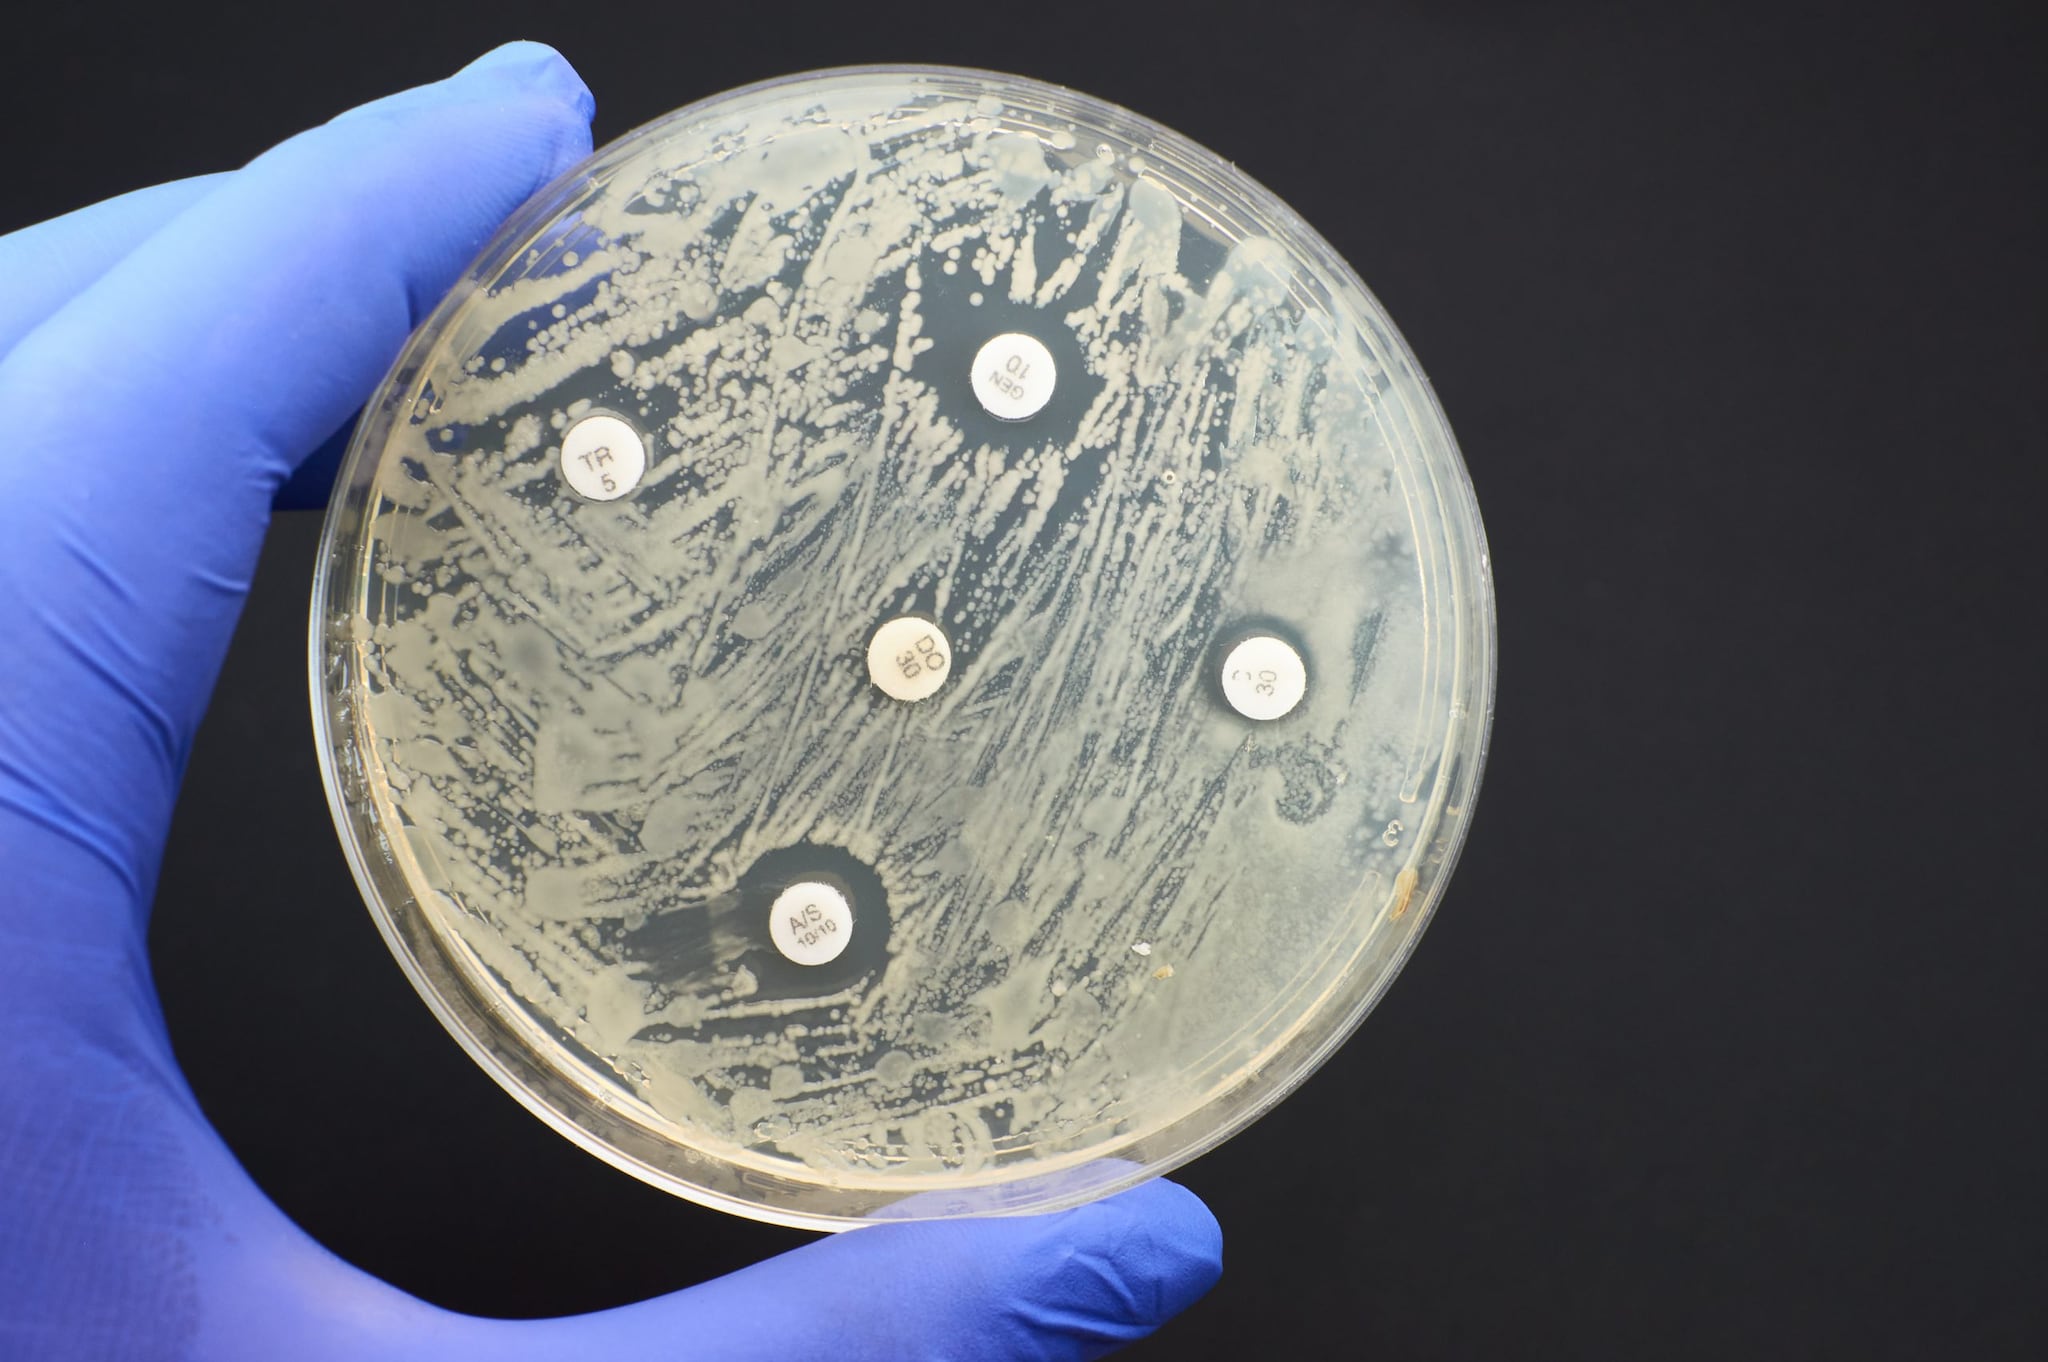 This image shows germs being grown on an agar plate in a lab.